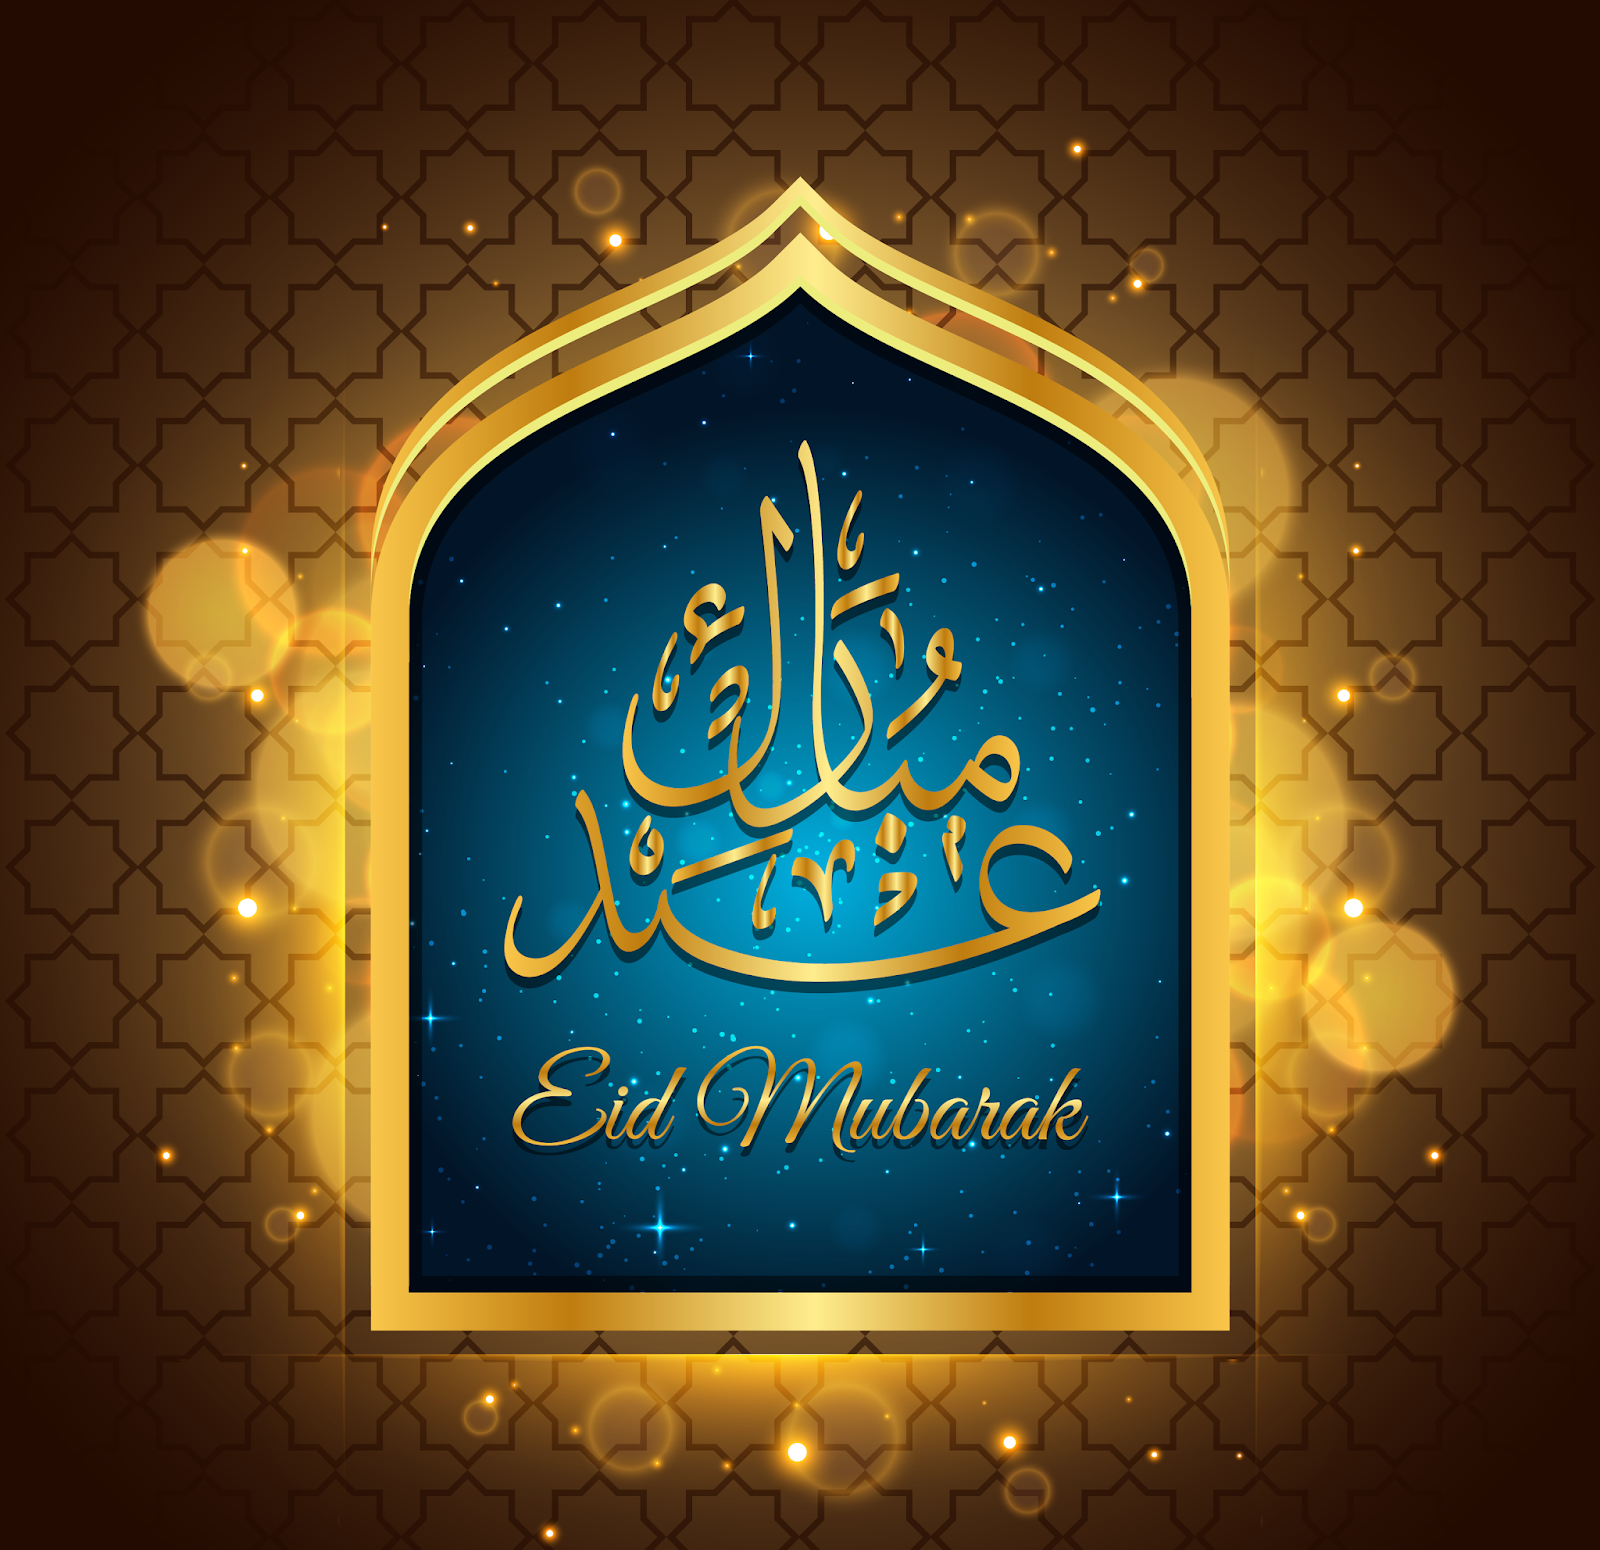 Celebrate this Eid with family and friends